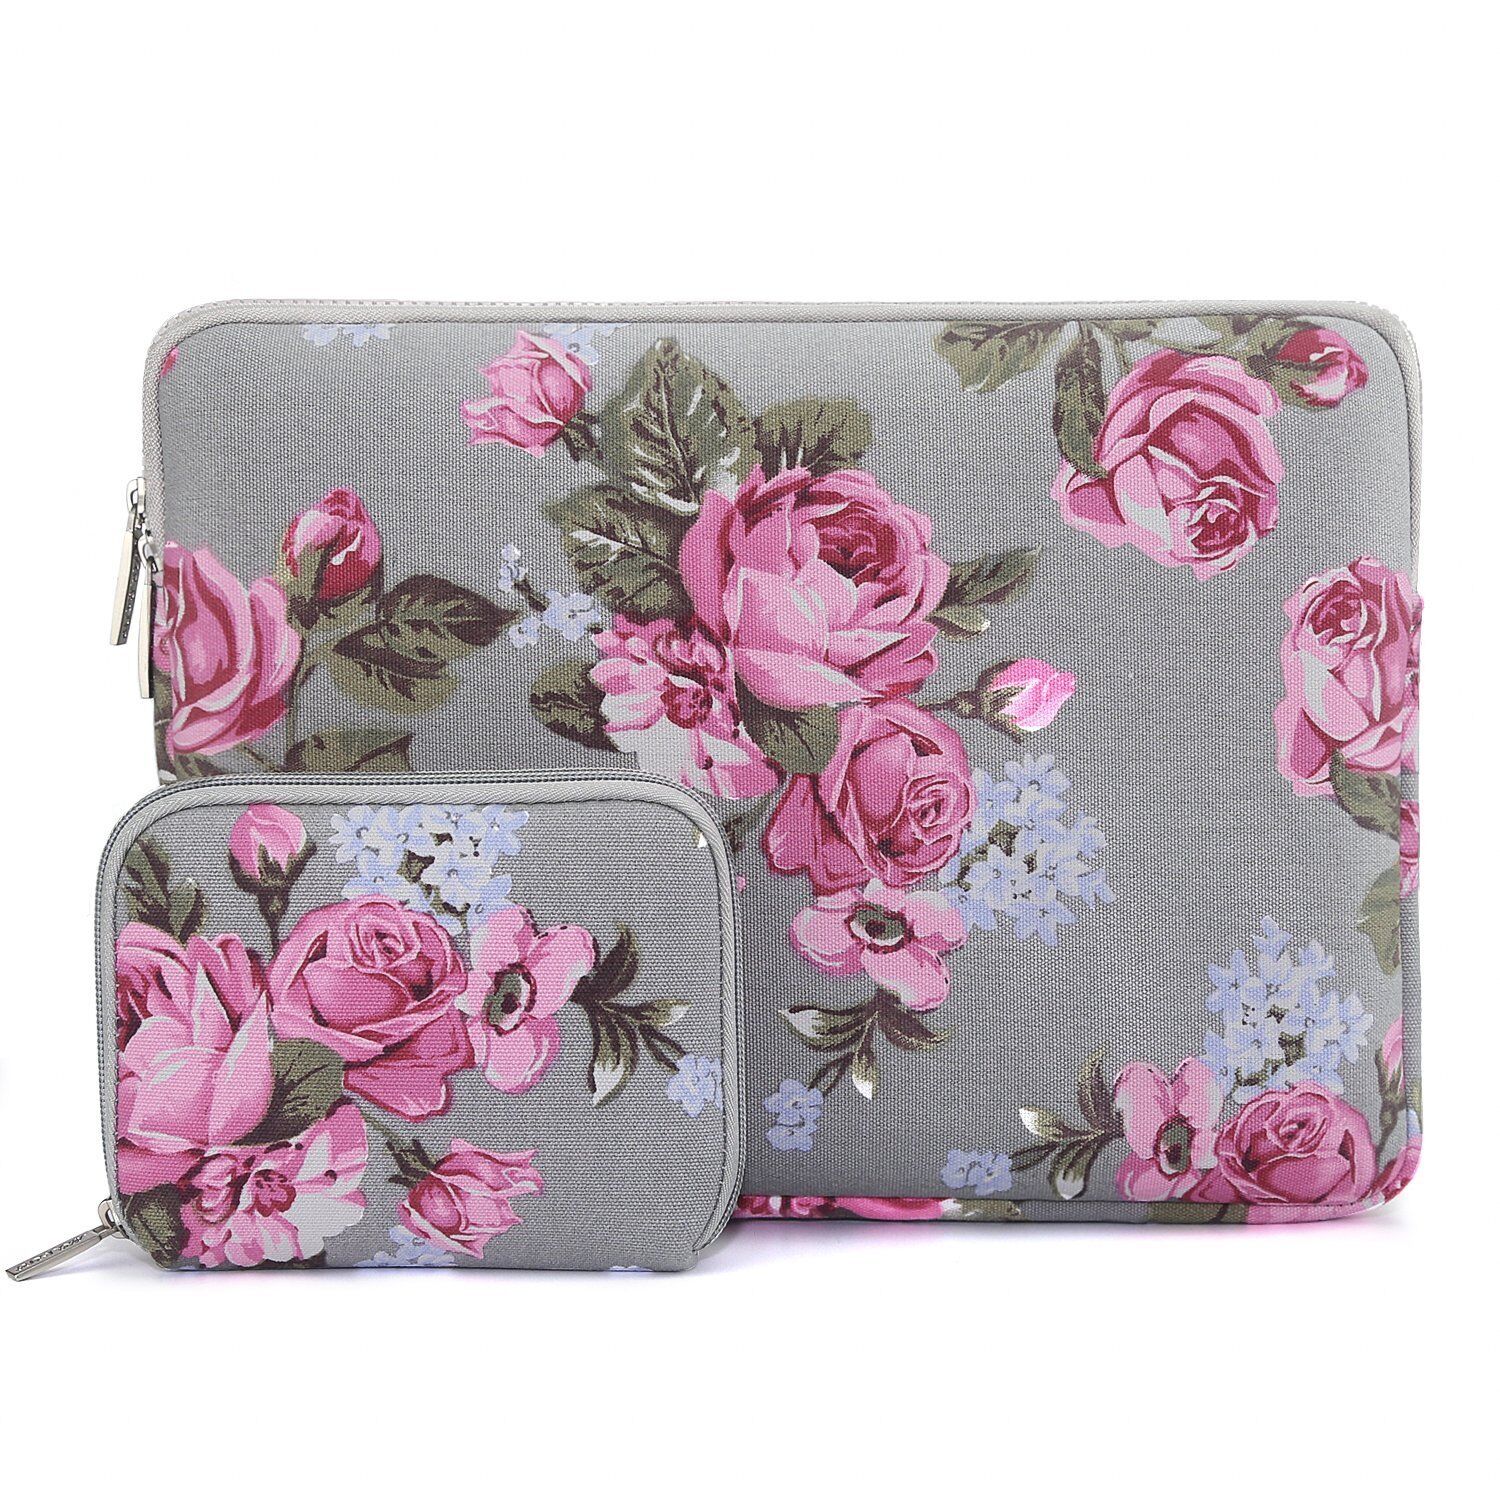 Laptop Zipper Floral Sleeve Case 13 13.3 15 15.6inch for Macbook Air Pro13 15